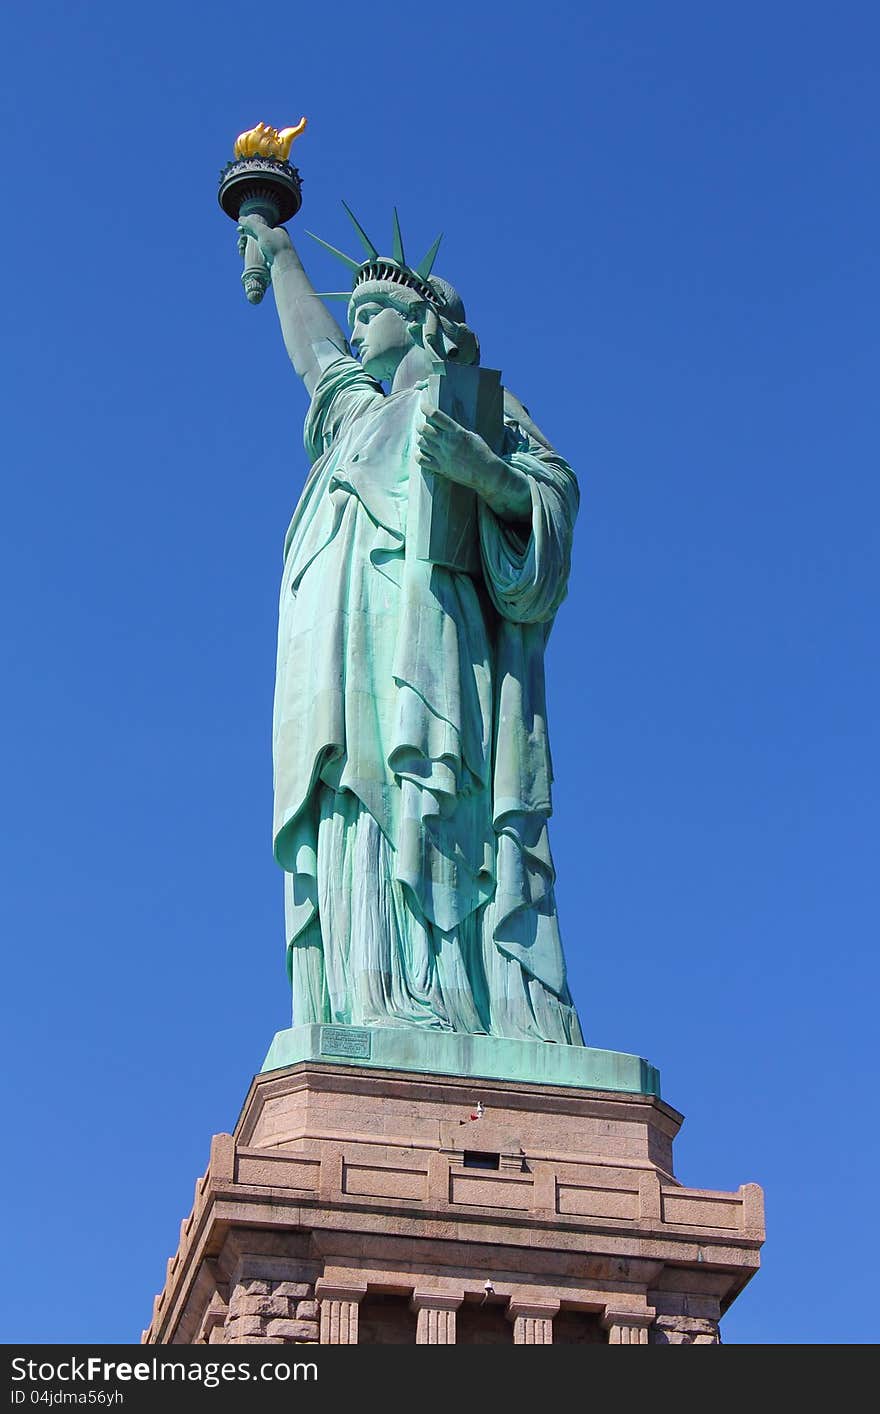 Statue Colossal de la liberte, such is the name wrote on the plaque at the base of the Statue of Liberty. Statue Colossal de la liberte, such is the name wrote on the plaque at the base of the Statue of Liberty